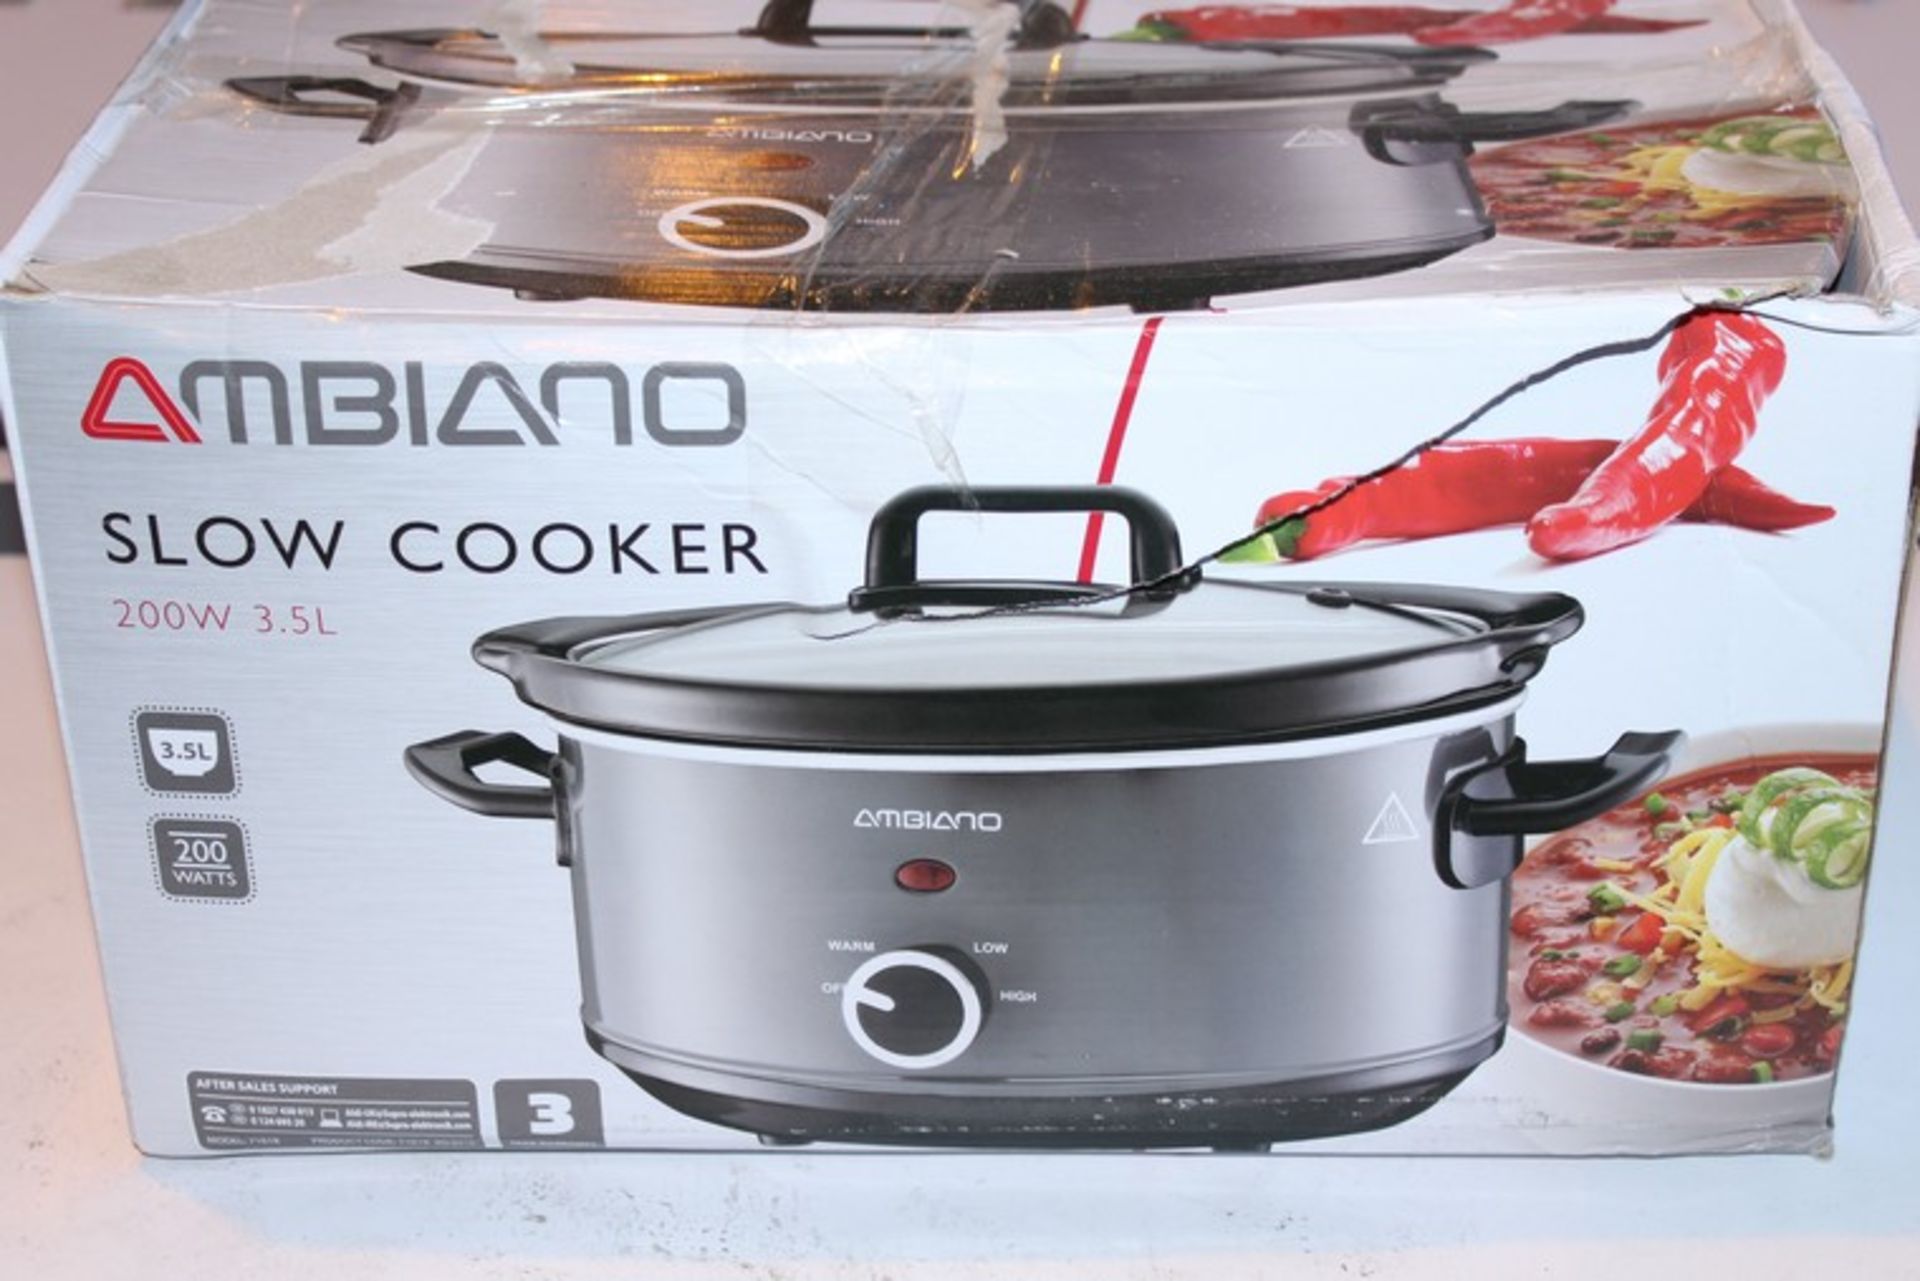 2 x 2 AMBIANO SLOW COOKERS (20.02.18) *PLEASE NOTE THAT THE BID PRICE IS MULTIPLIED BY THE NUMBER OF